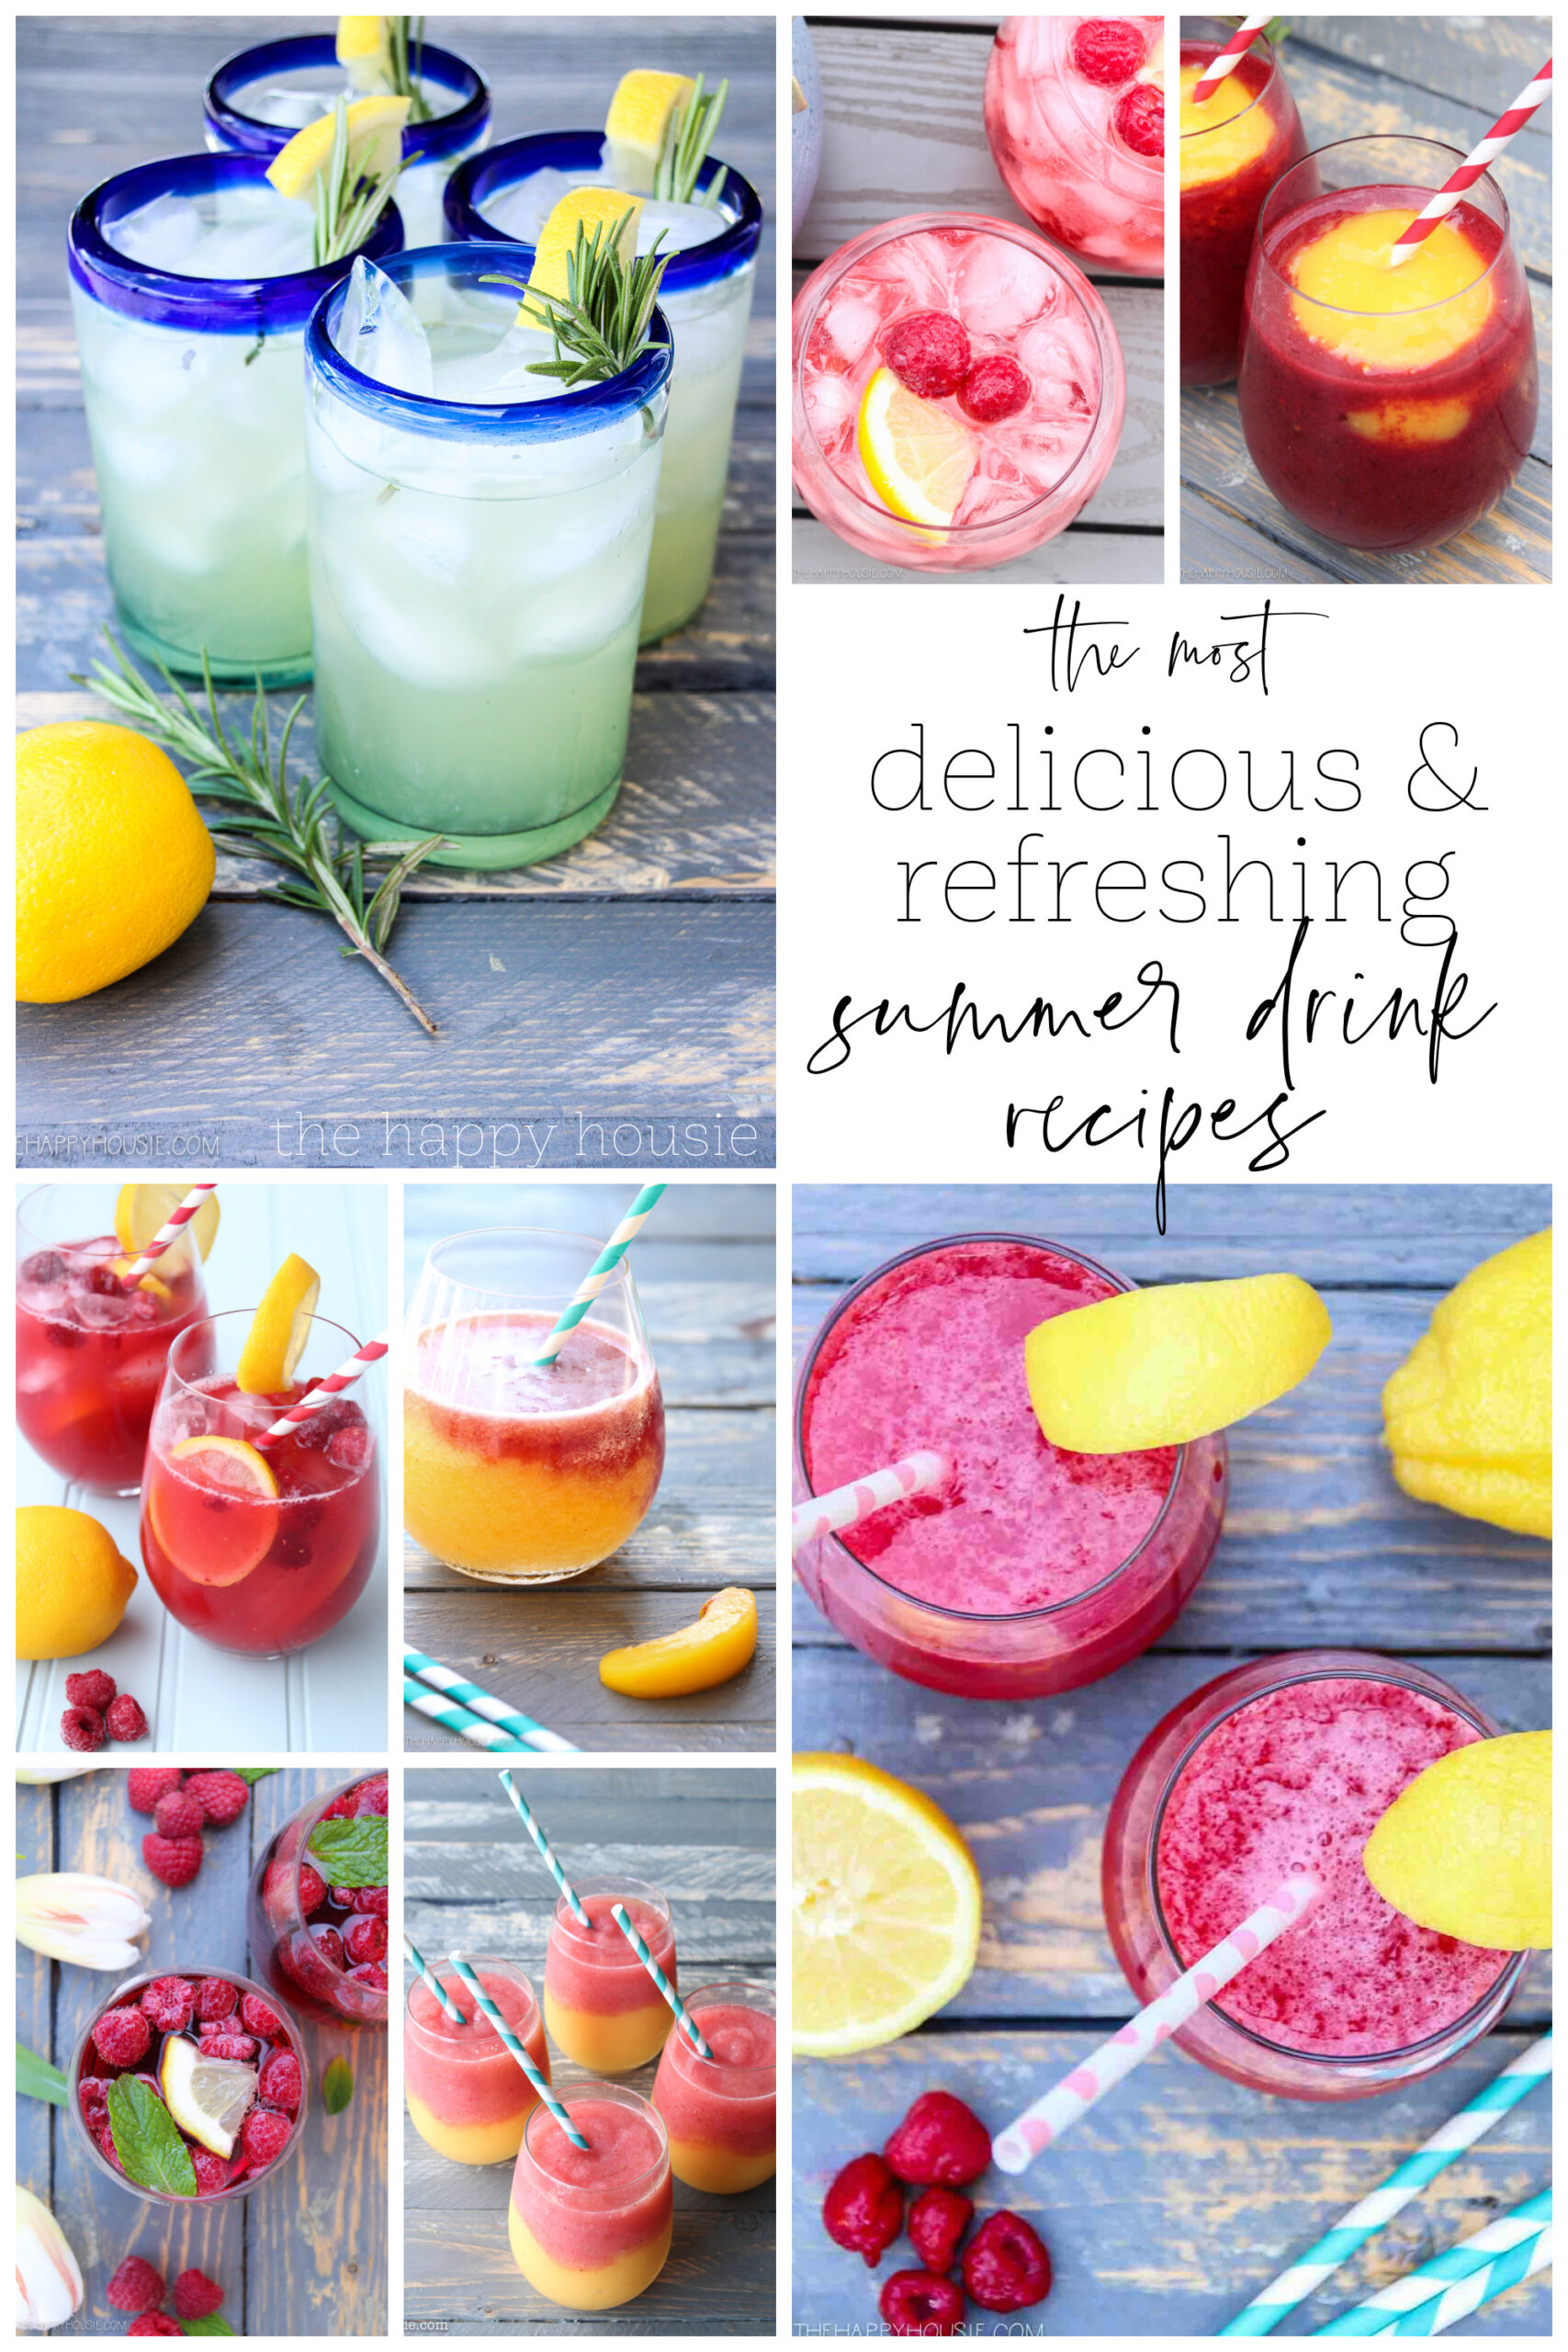 a collage image featuring several refreshing summer drink recipes